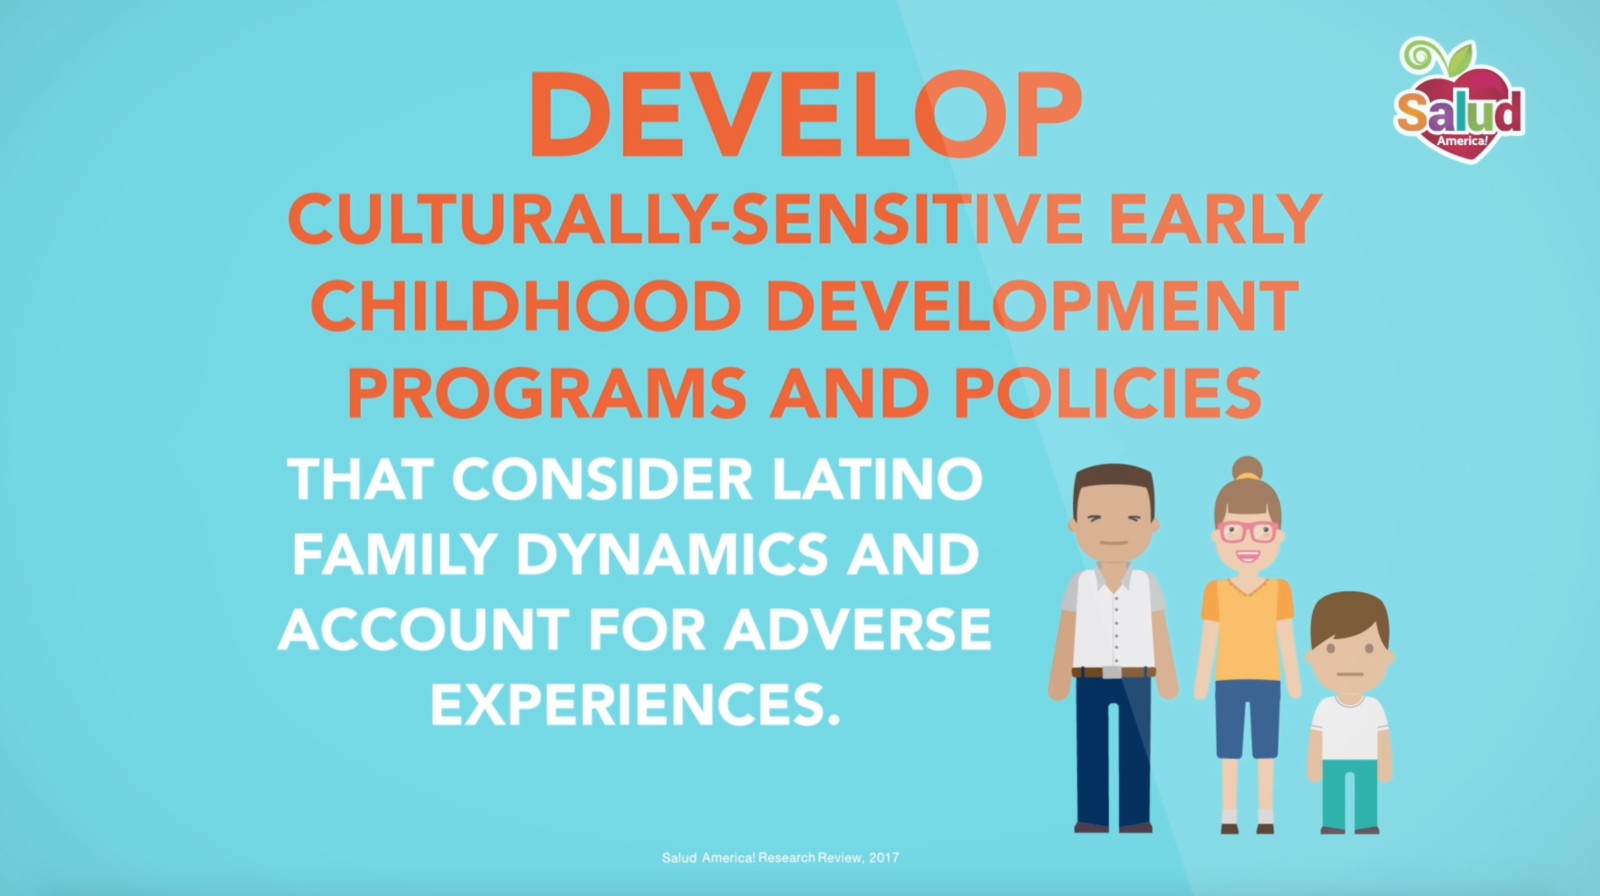 Latino early childhood development - policy - cultural sensitivity